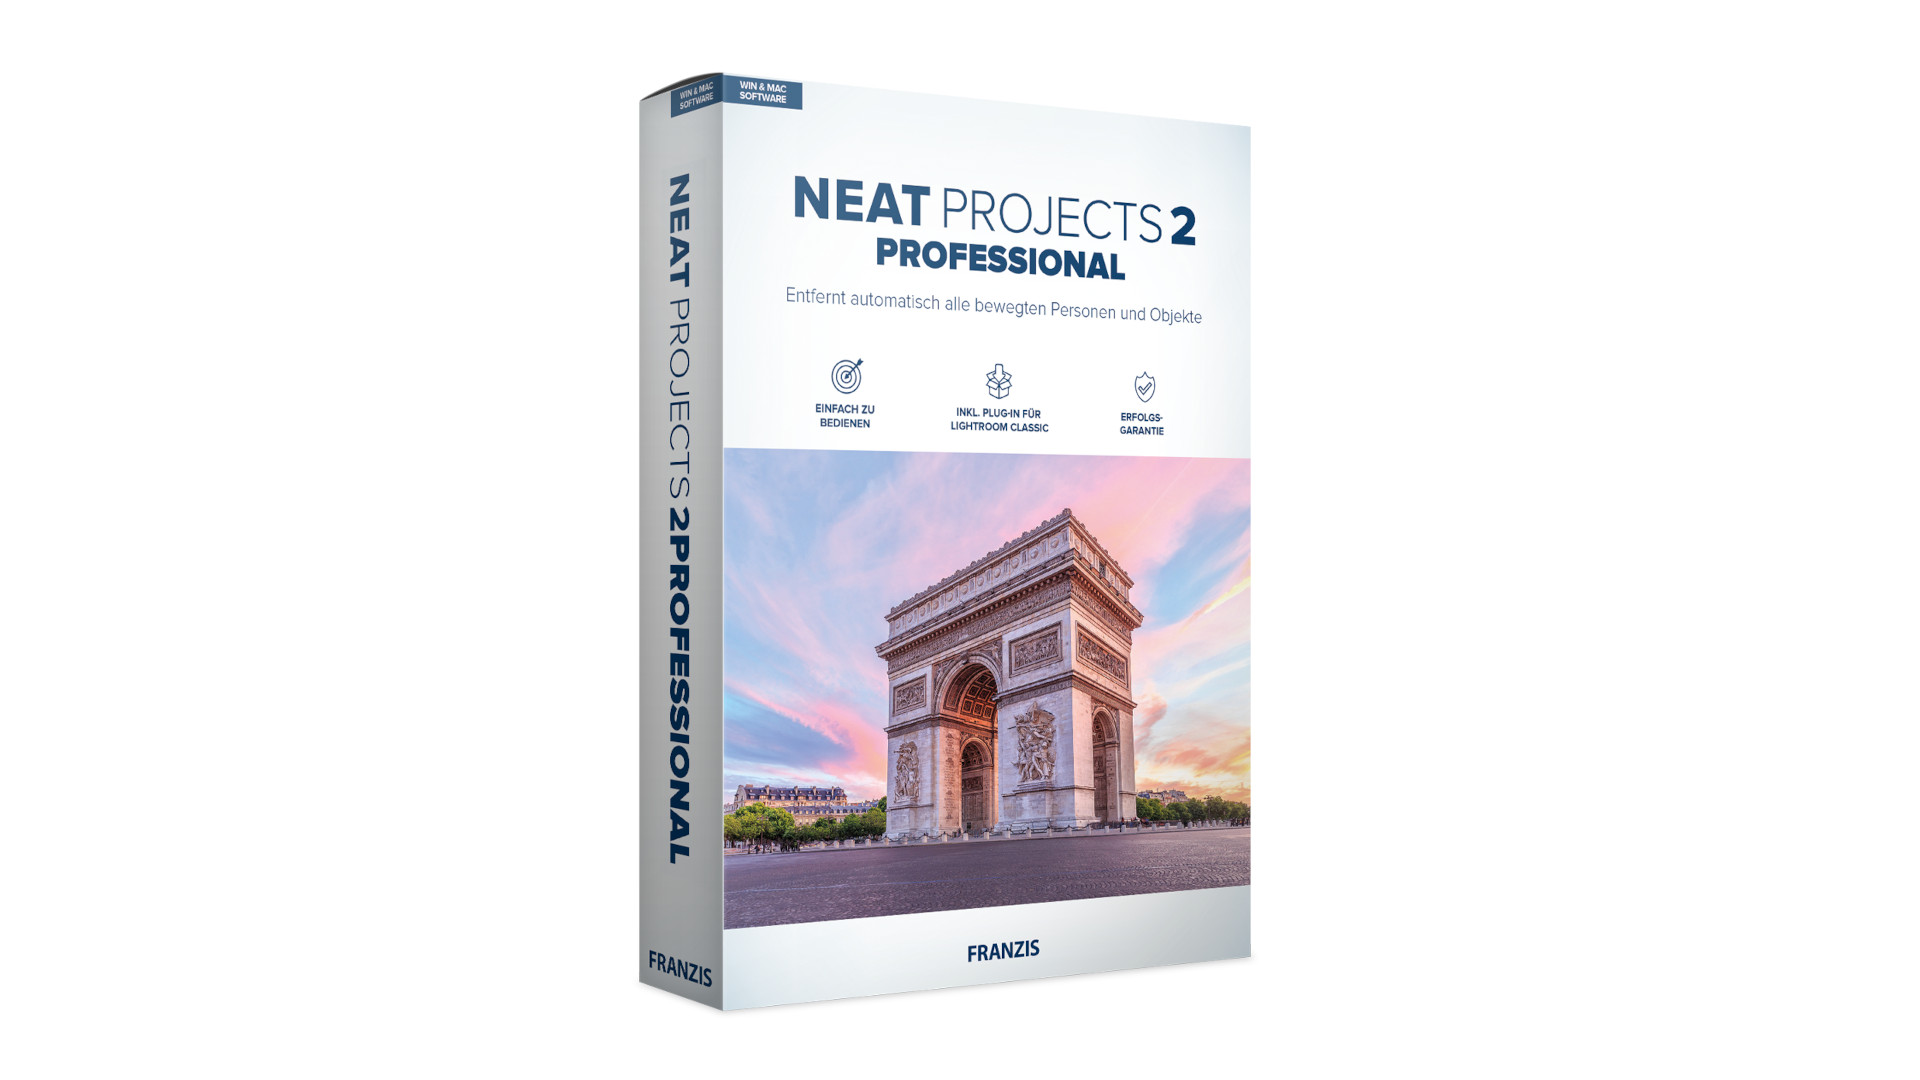 NEAT projects 2 Pro - Project Software Key (Lifetime / 1 PC), 33.89$